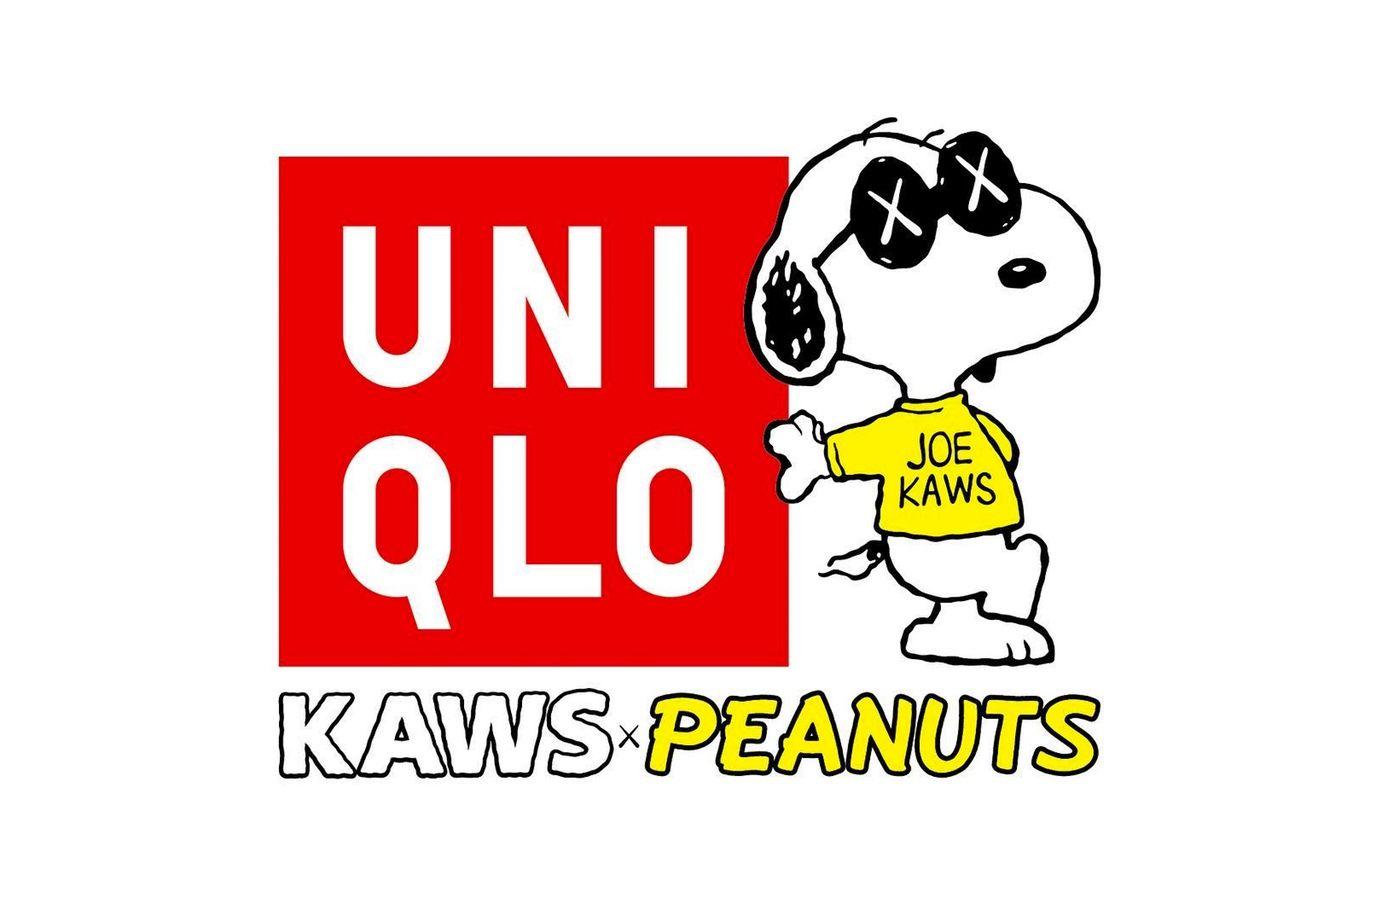 The KAWS x 'Peanuts' x Uniqlo UT Collection Is Coming to colette